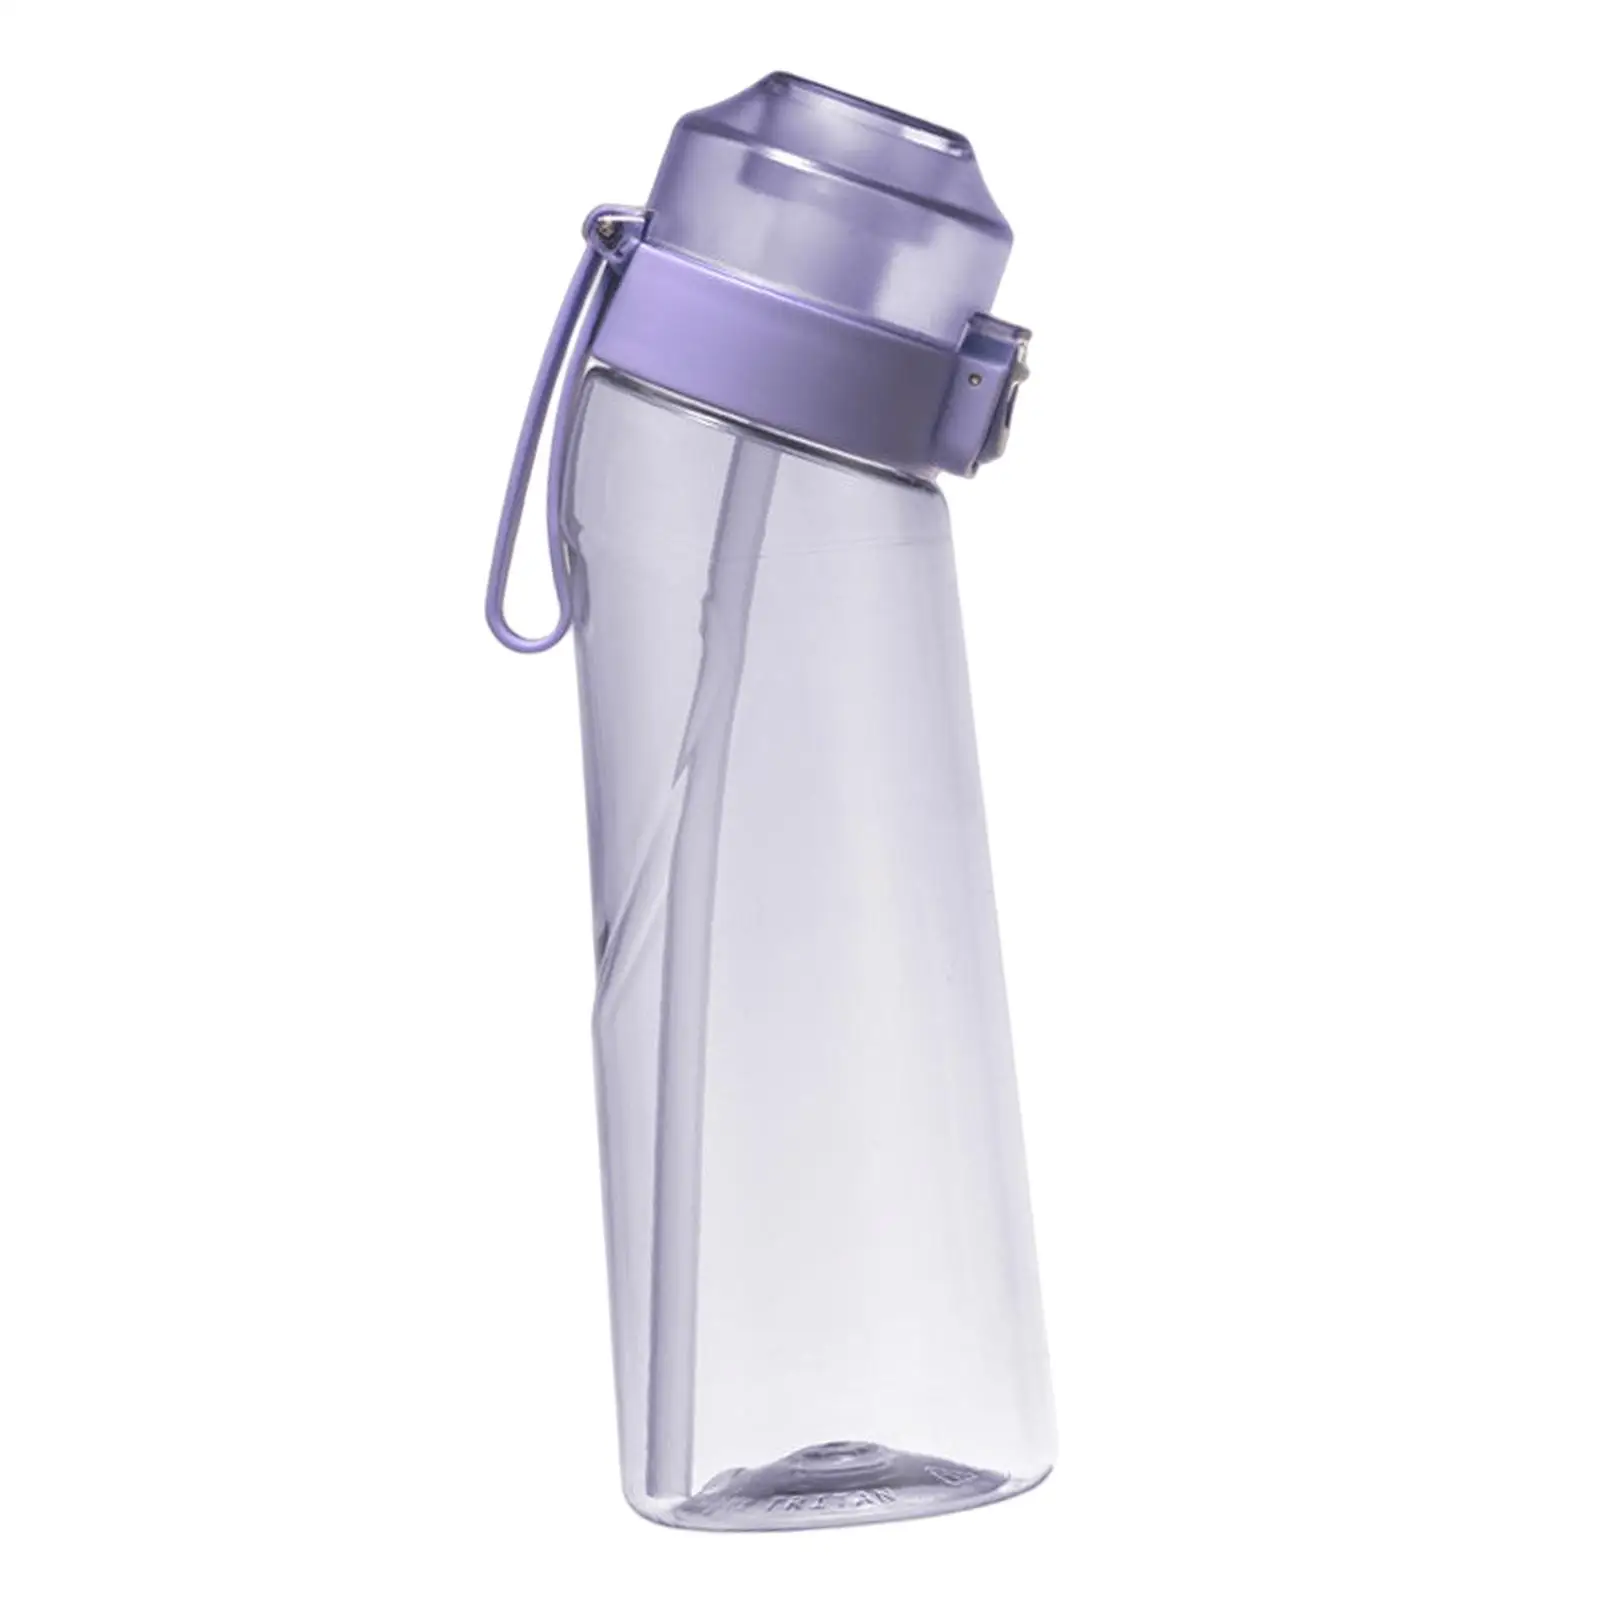 Fitness Bottle Daily Water Jug Ensure Drink Enough Water Daily Leakproof Sports